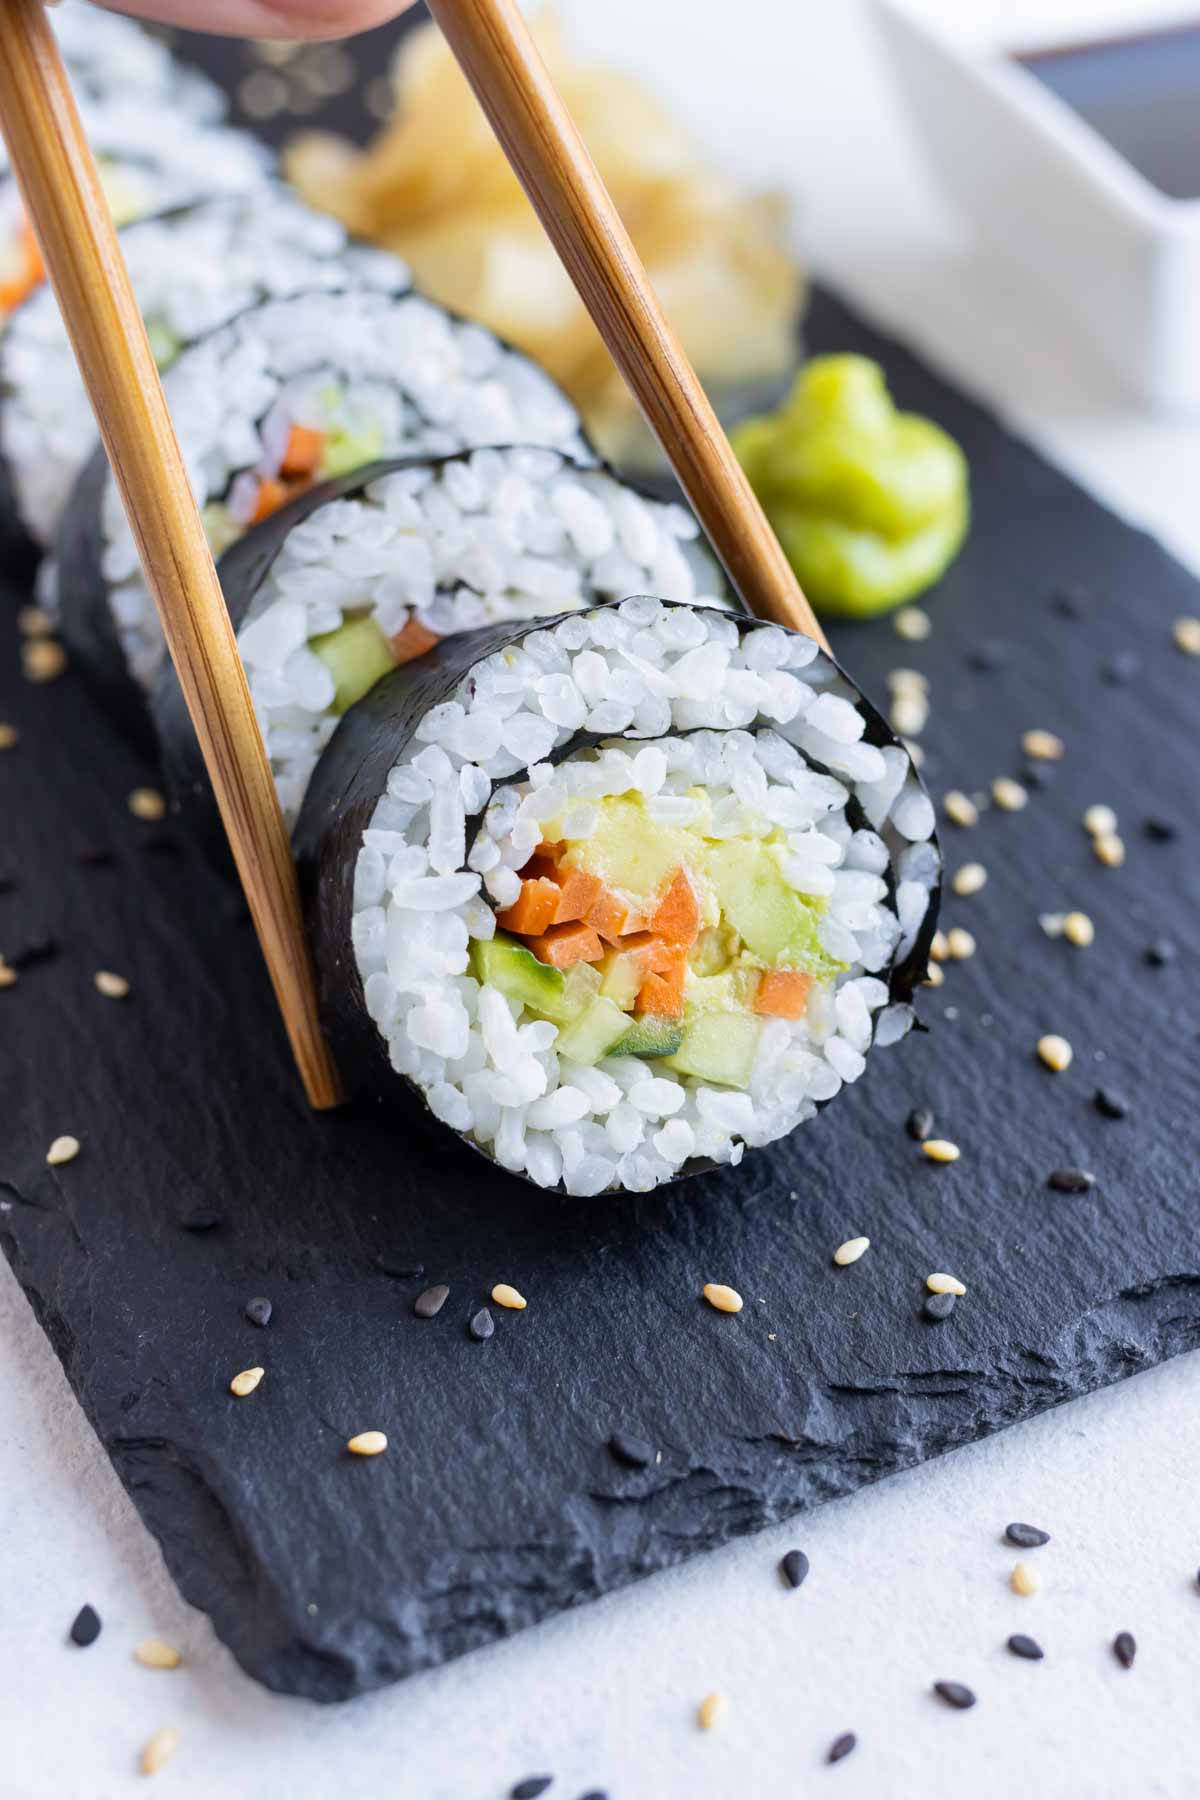 Avocado Roll Recipe (with Cucumber) - Evolving Table